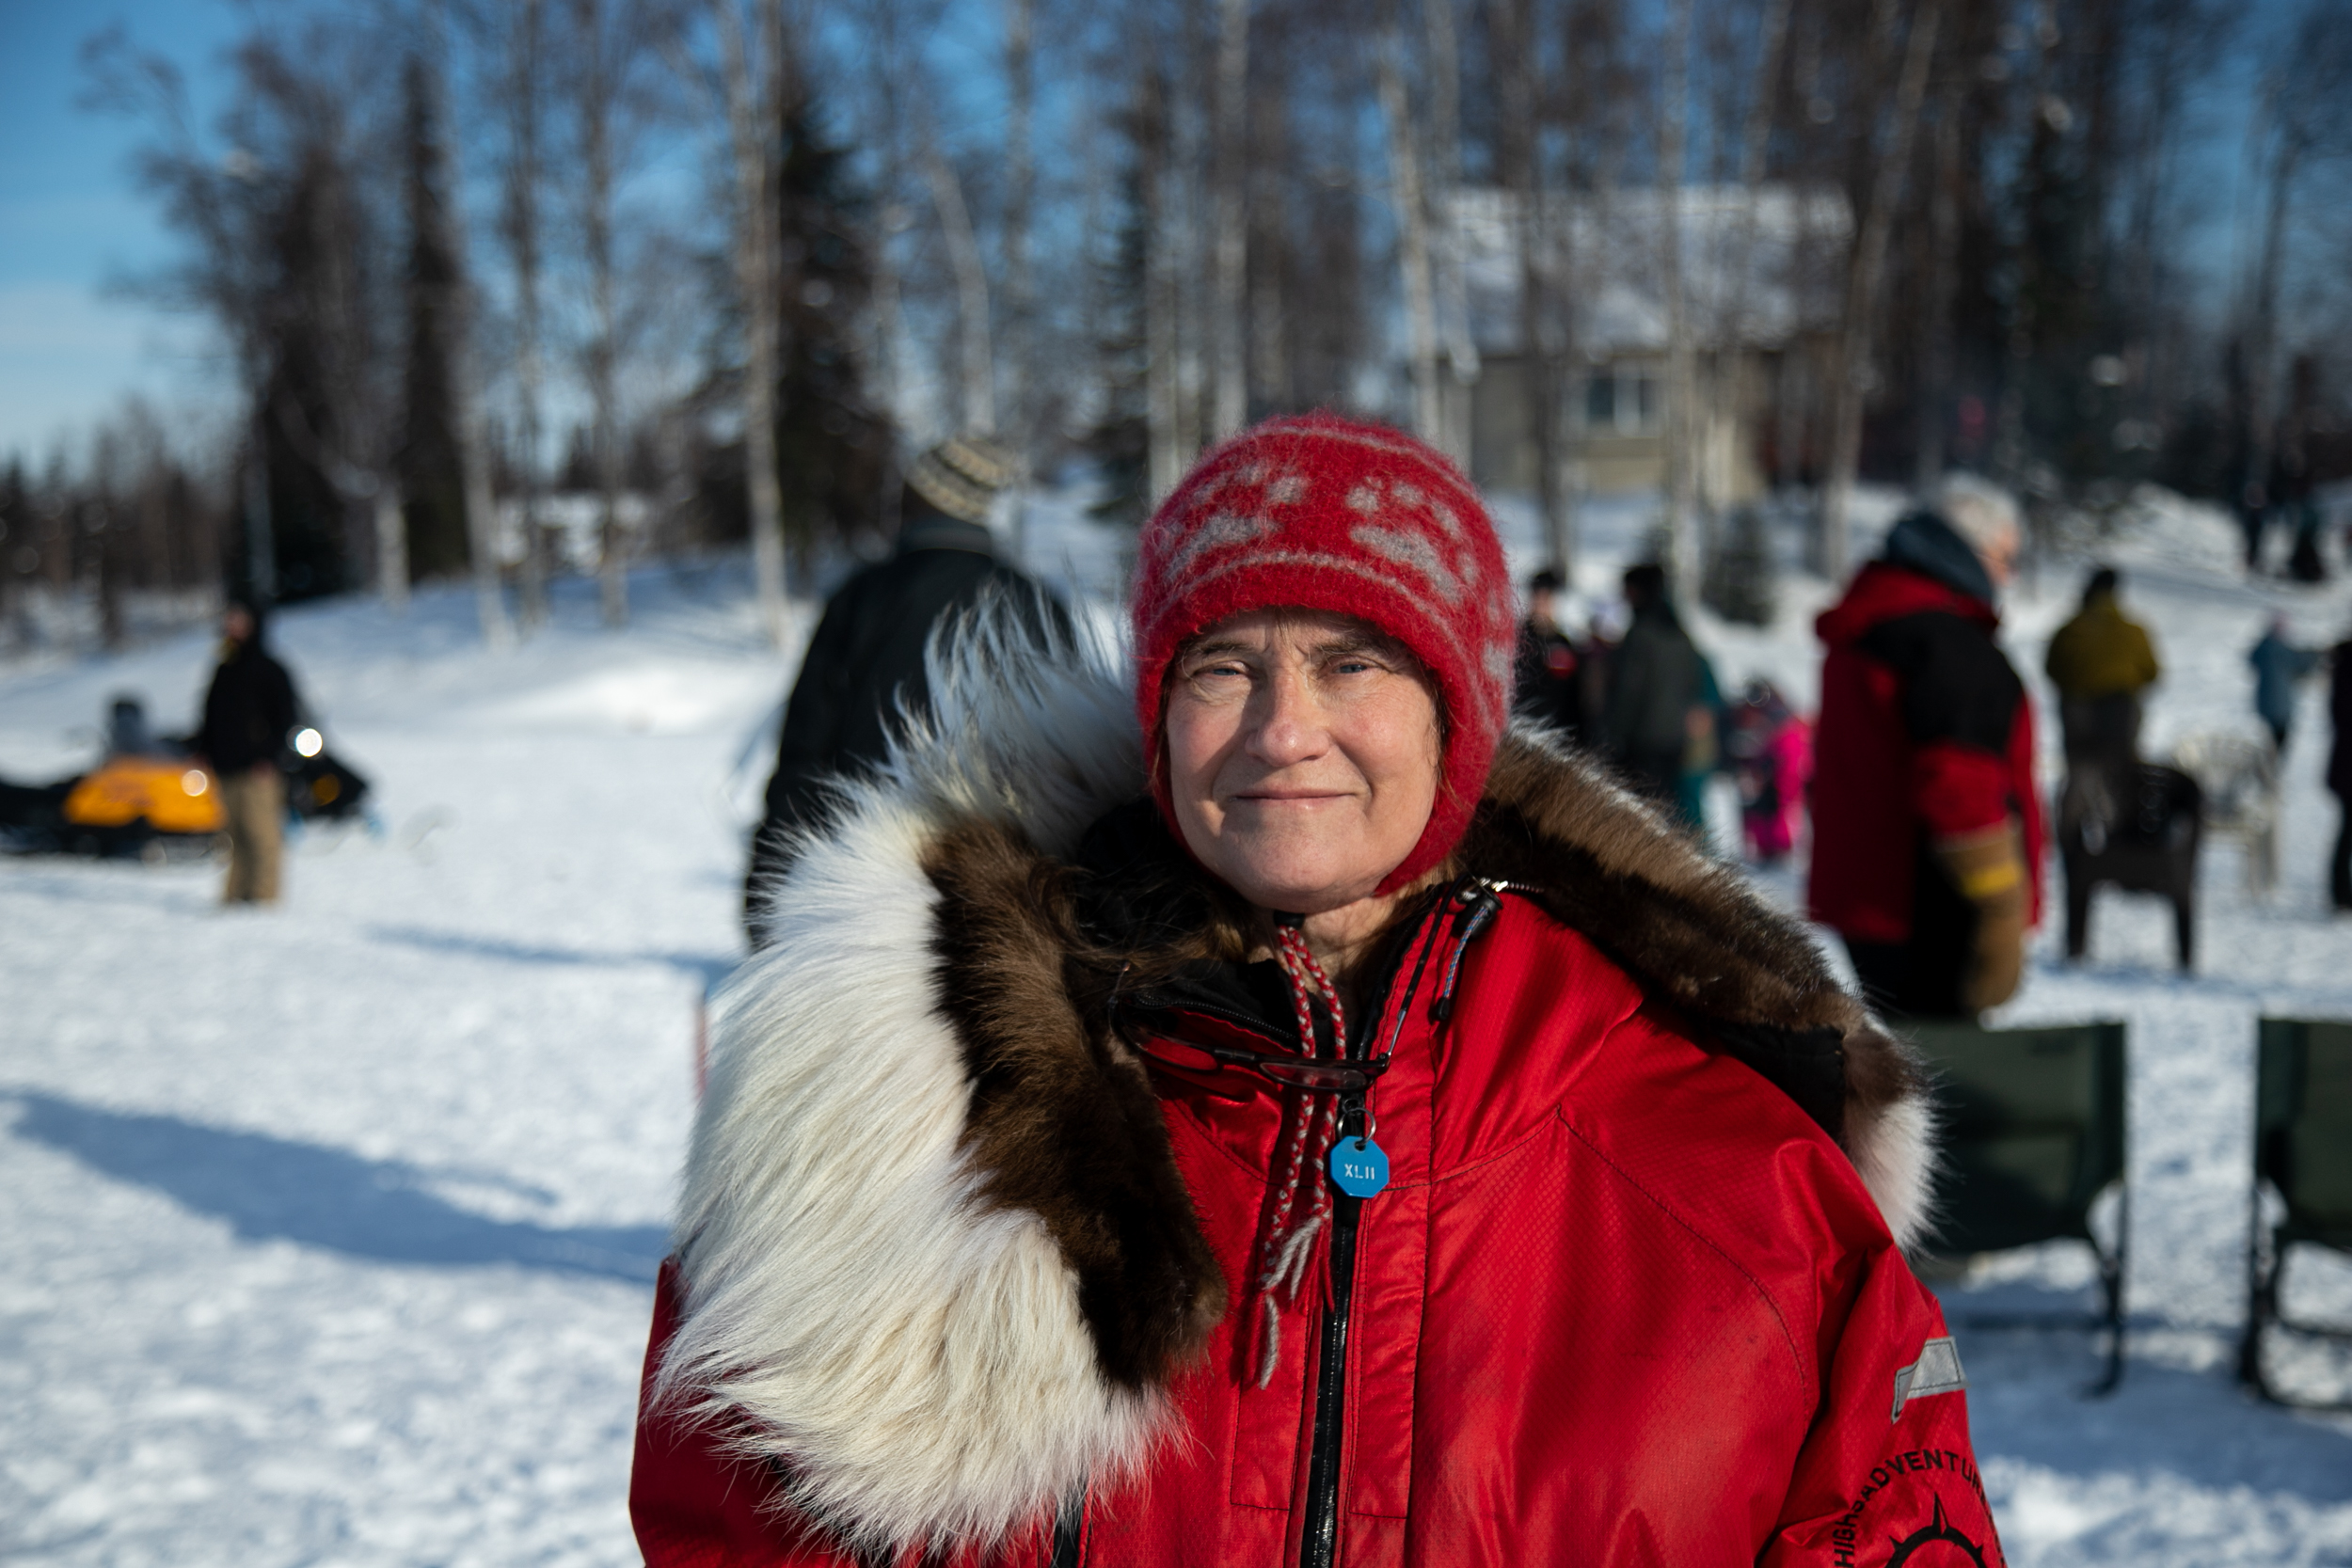 A woman wearing a red hat and red parka poses for a photo on a frozen lake.